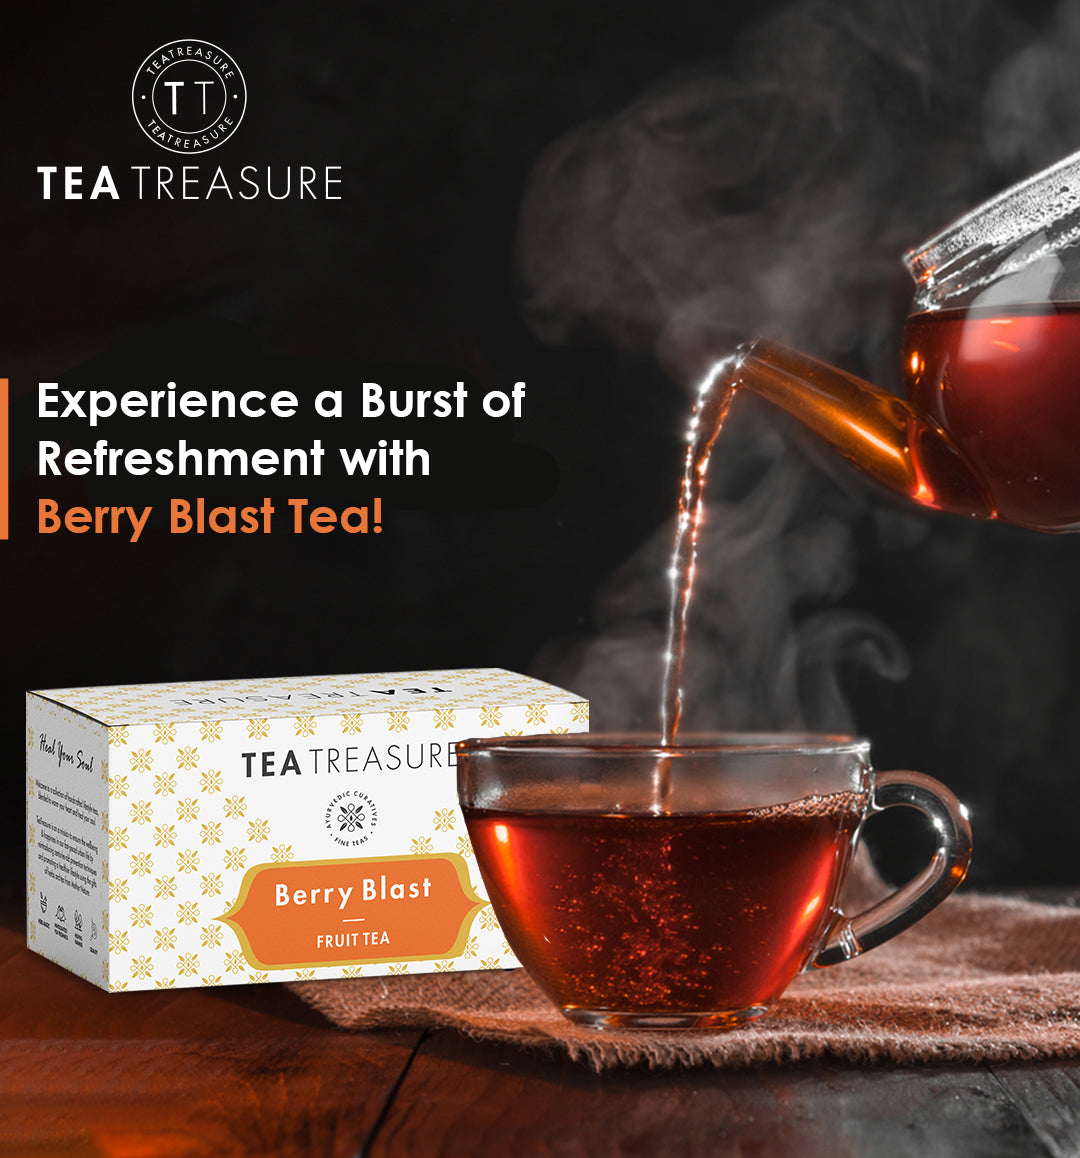 Our Tea of the Month - Berry Blast Tea